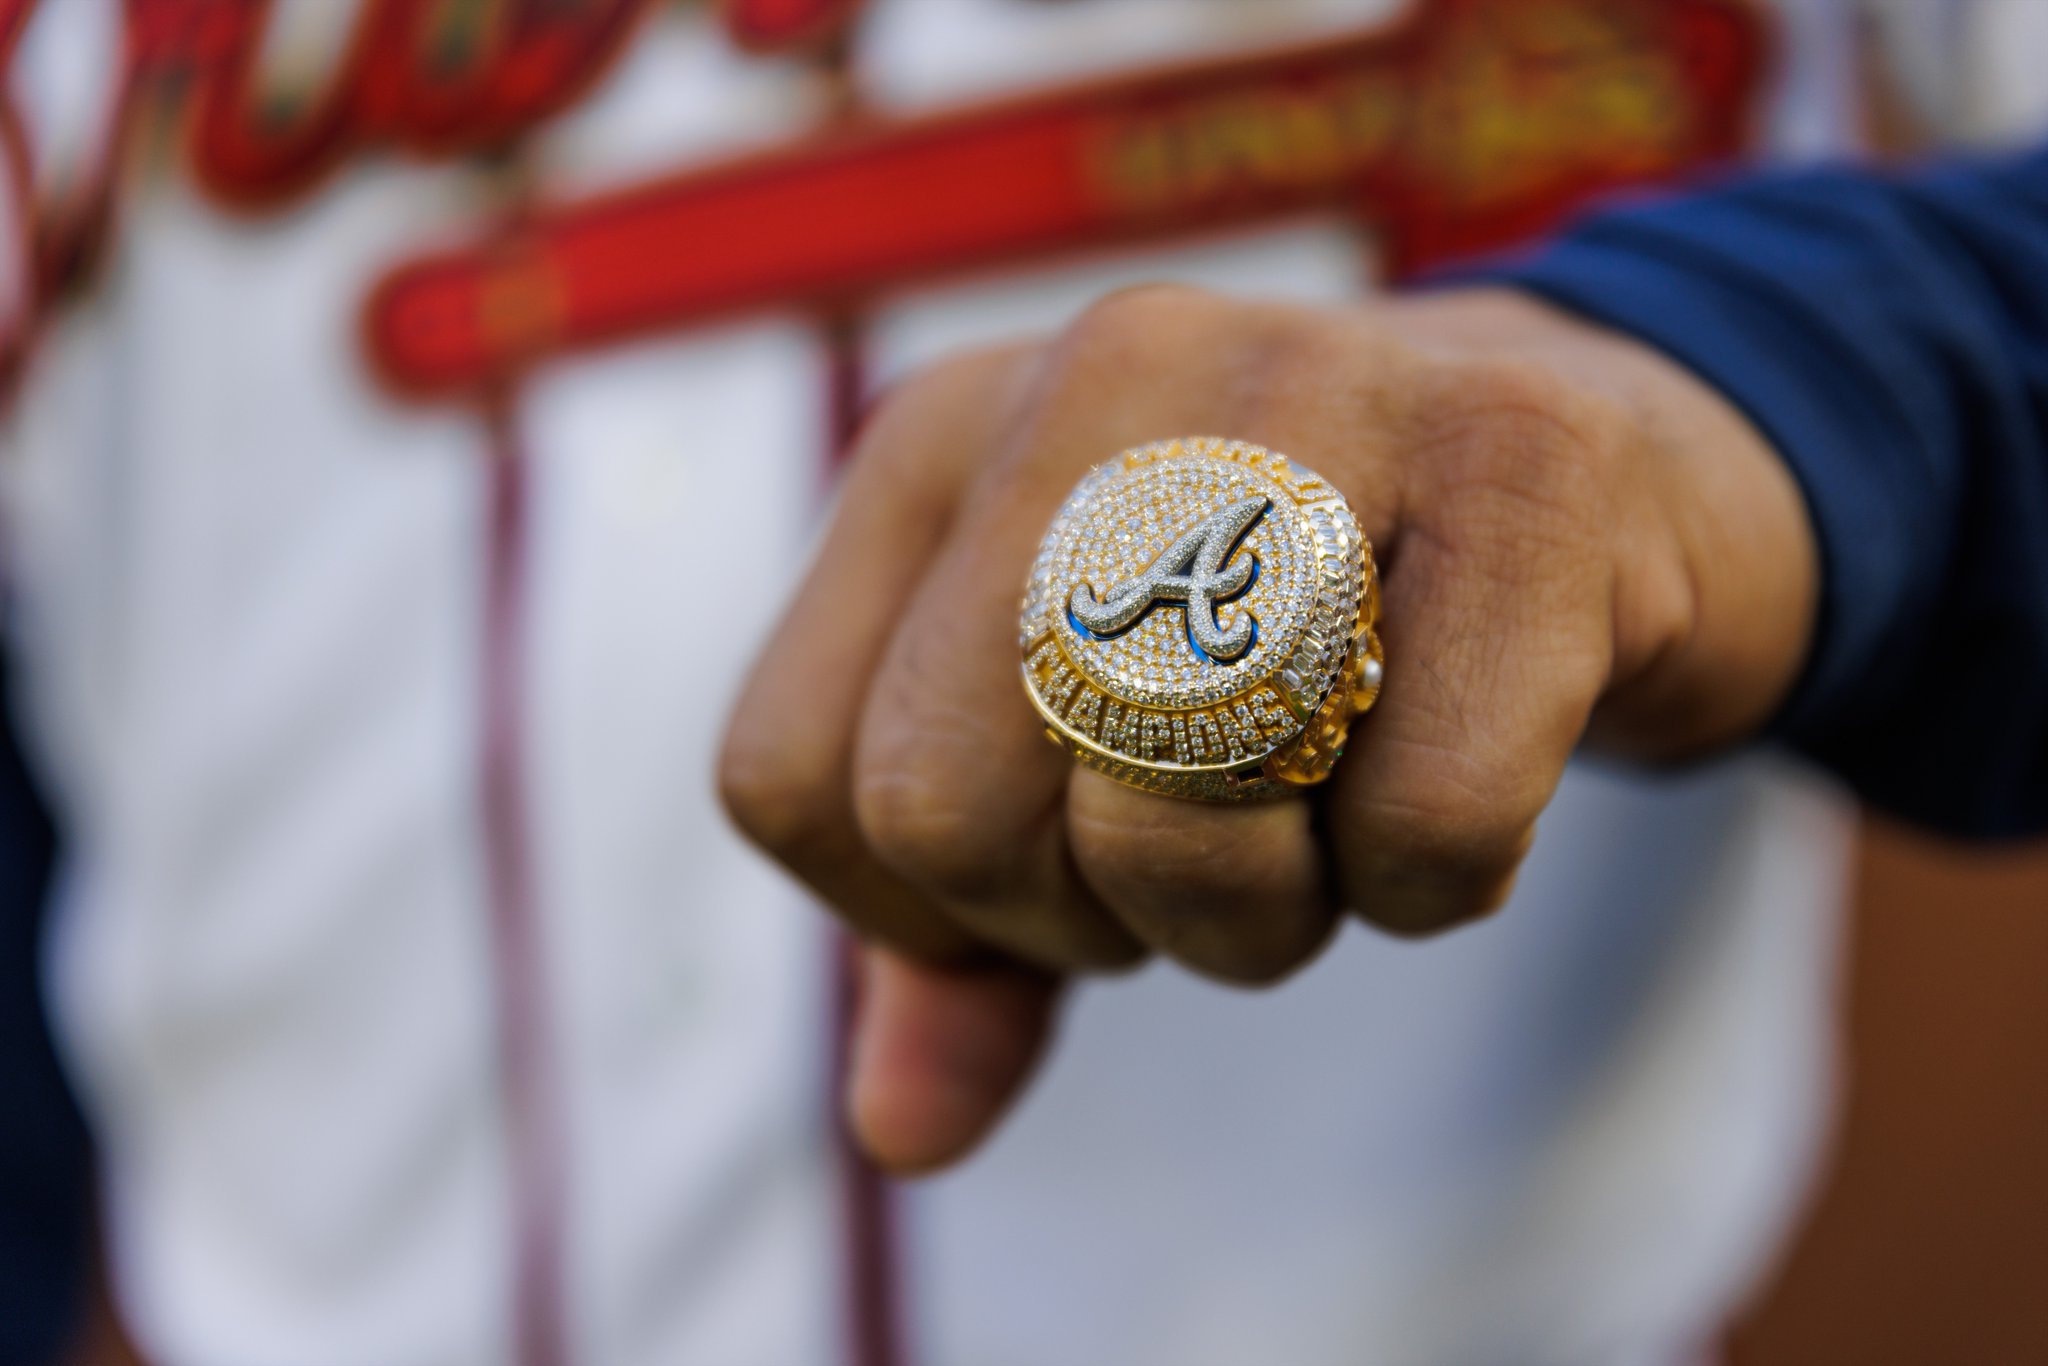 10 amazing details on the Houston Astros World Series rings